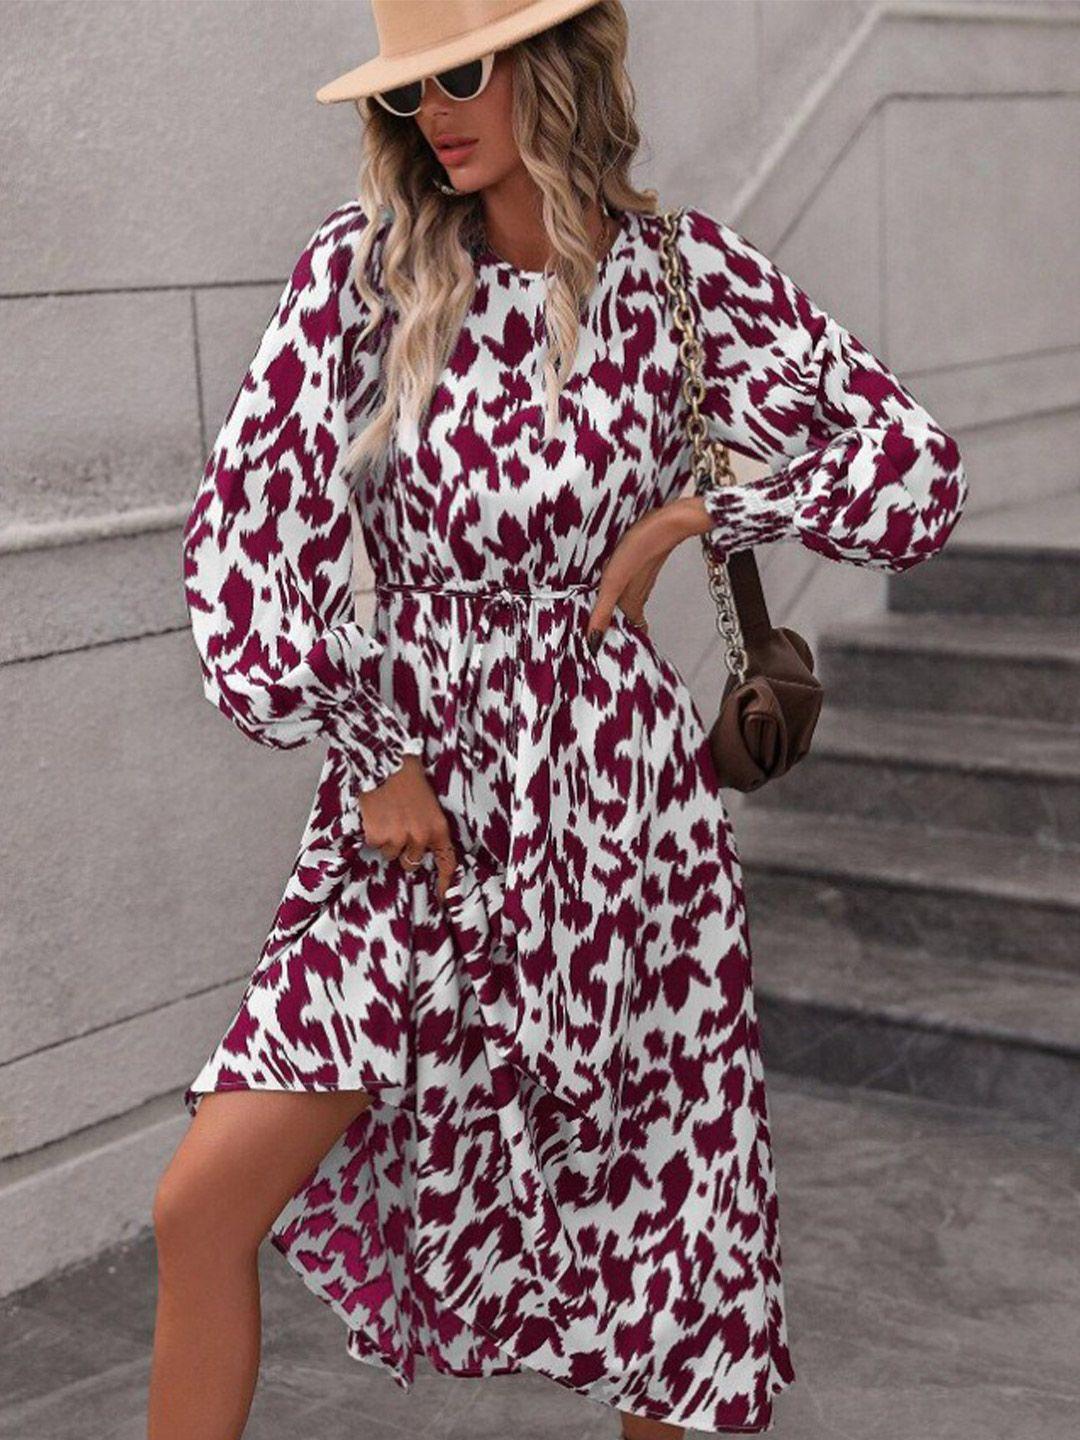 stylecast floral printed round neck long sleeves dress